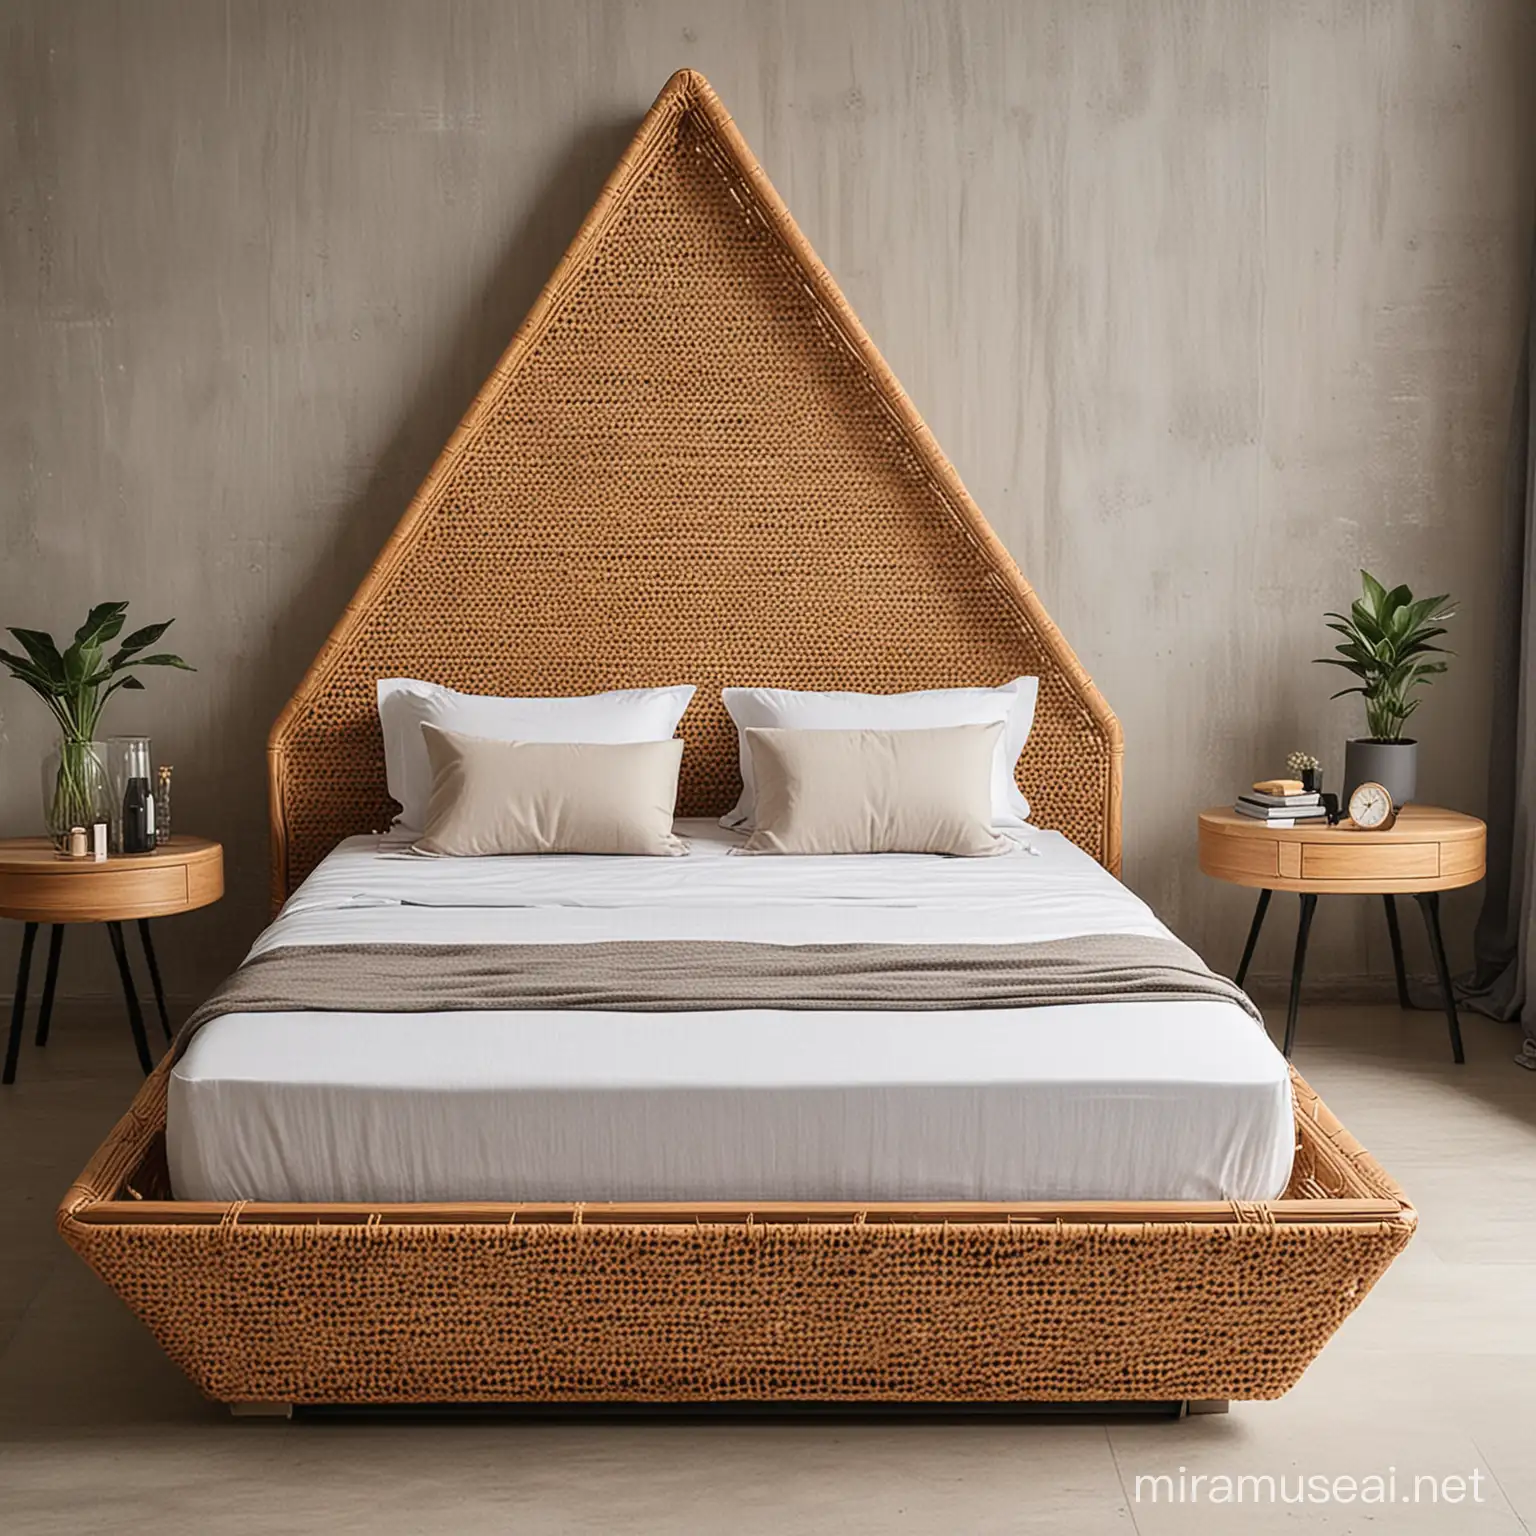 Contemporary TriangleShaped Single Bed with Rattan and Wood Design